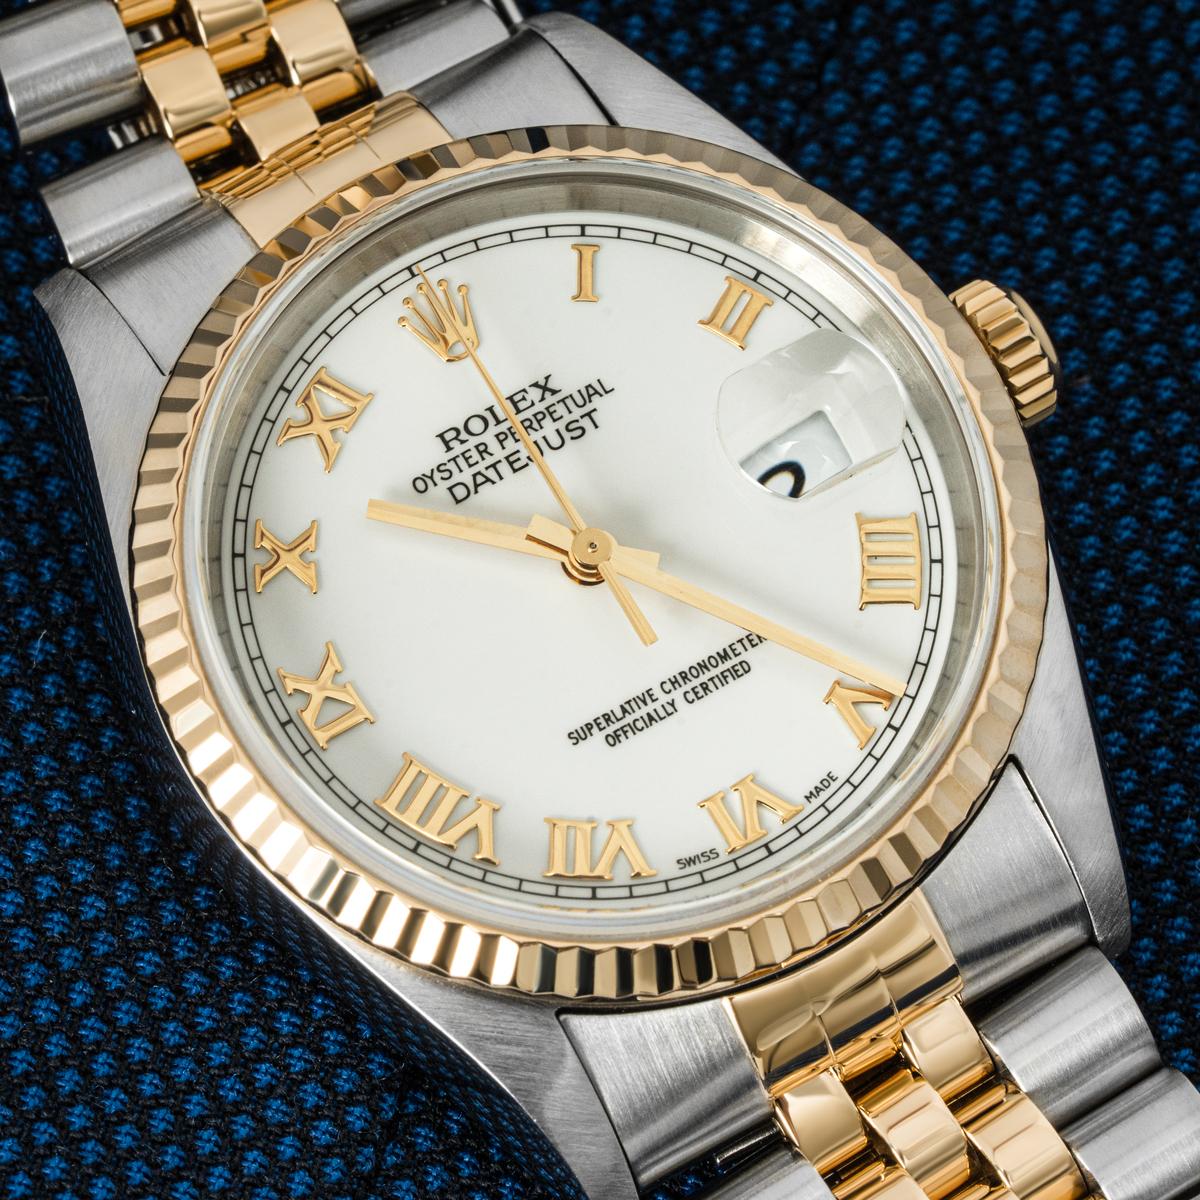 A 36mm stainless steel and yellow gold Datejust by Rolex. Featuring a white dial with applied roman numerals and a yellow gold fluted bezel. Fitted with a sapphire crystal, a self-winding automatic movement and a steel and gold Jubilee bracelet